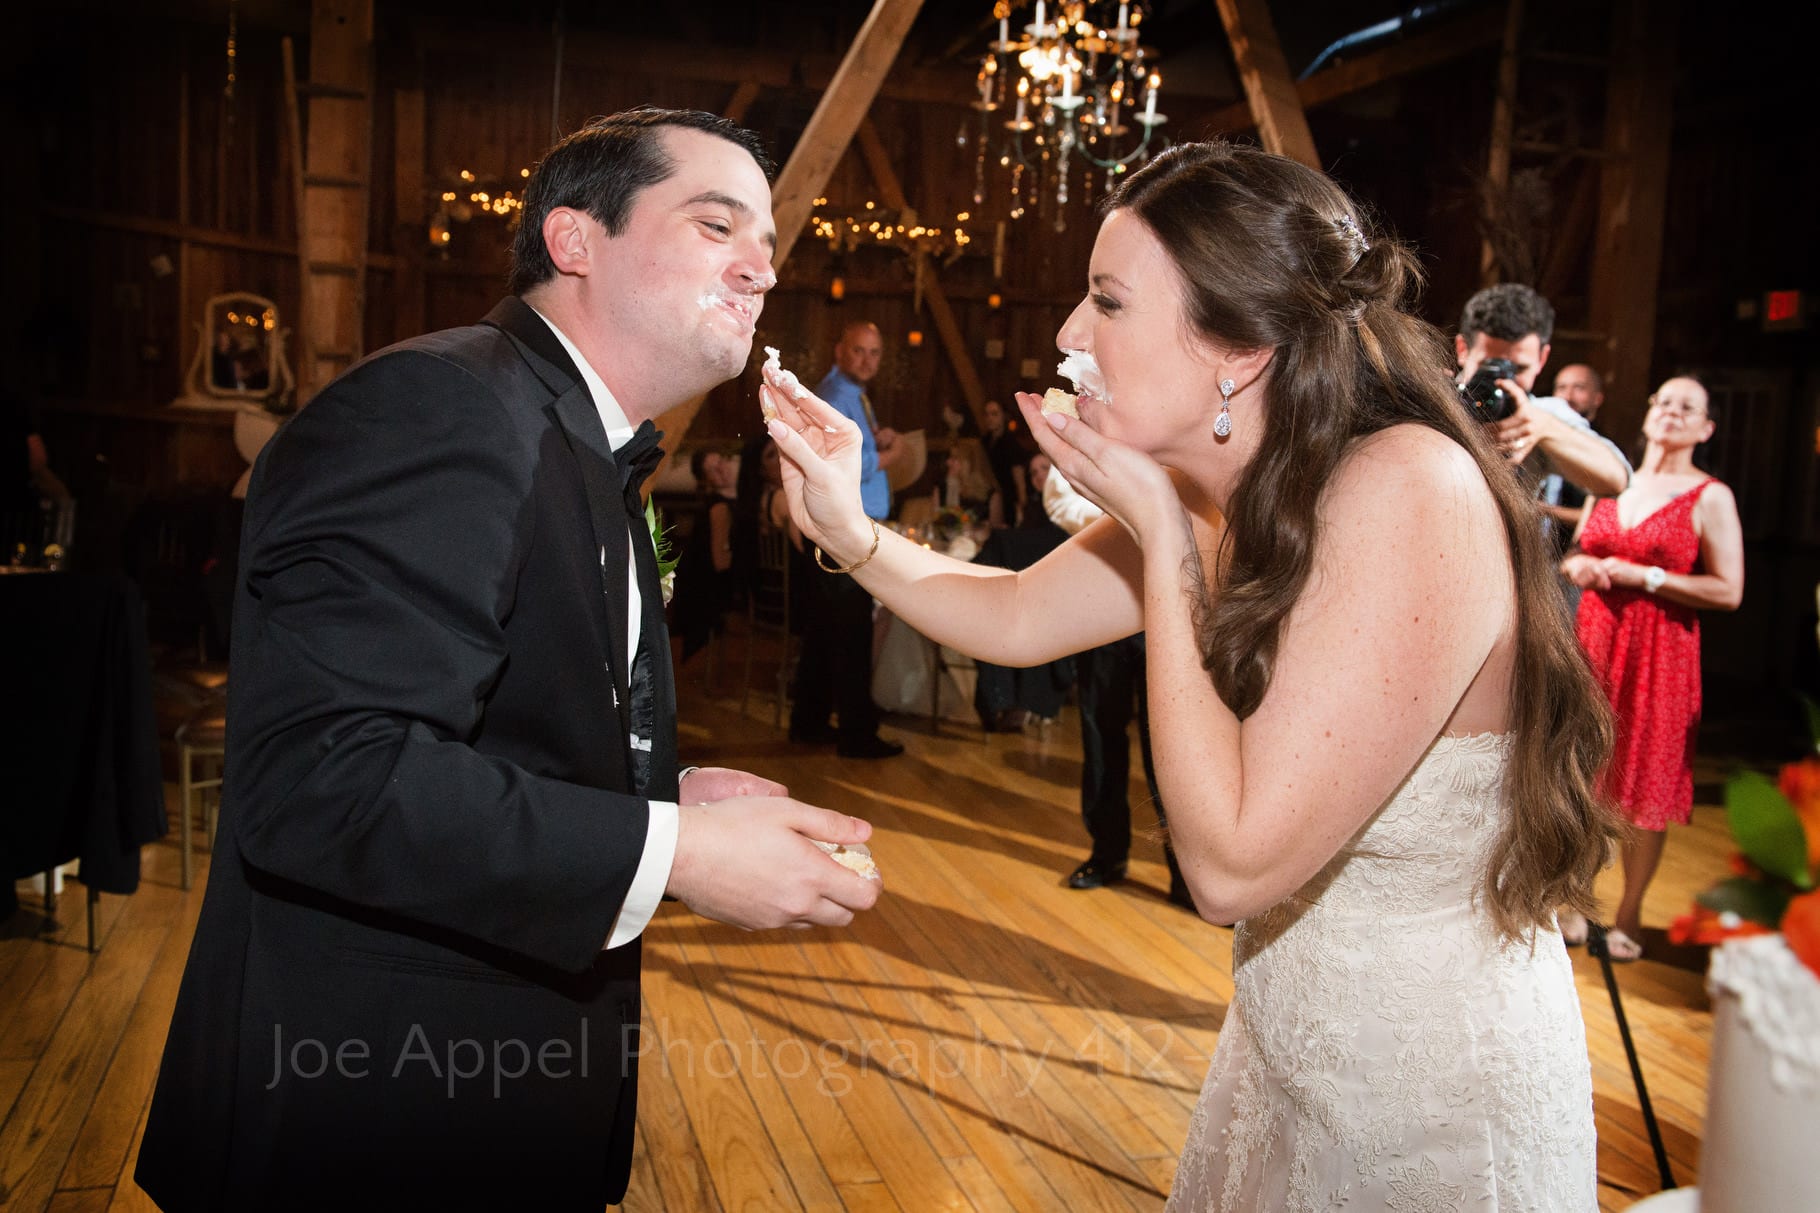 bride and groom laugh as they smear cake on each other's faces during their Chanteclaire Farm Wedding.